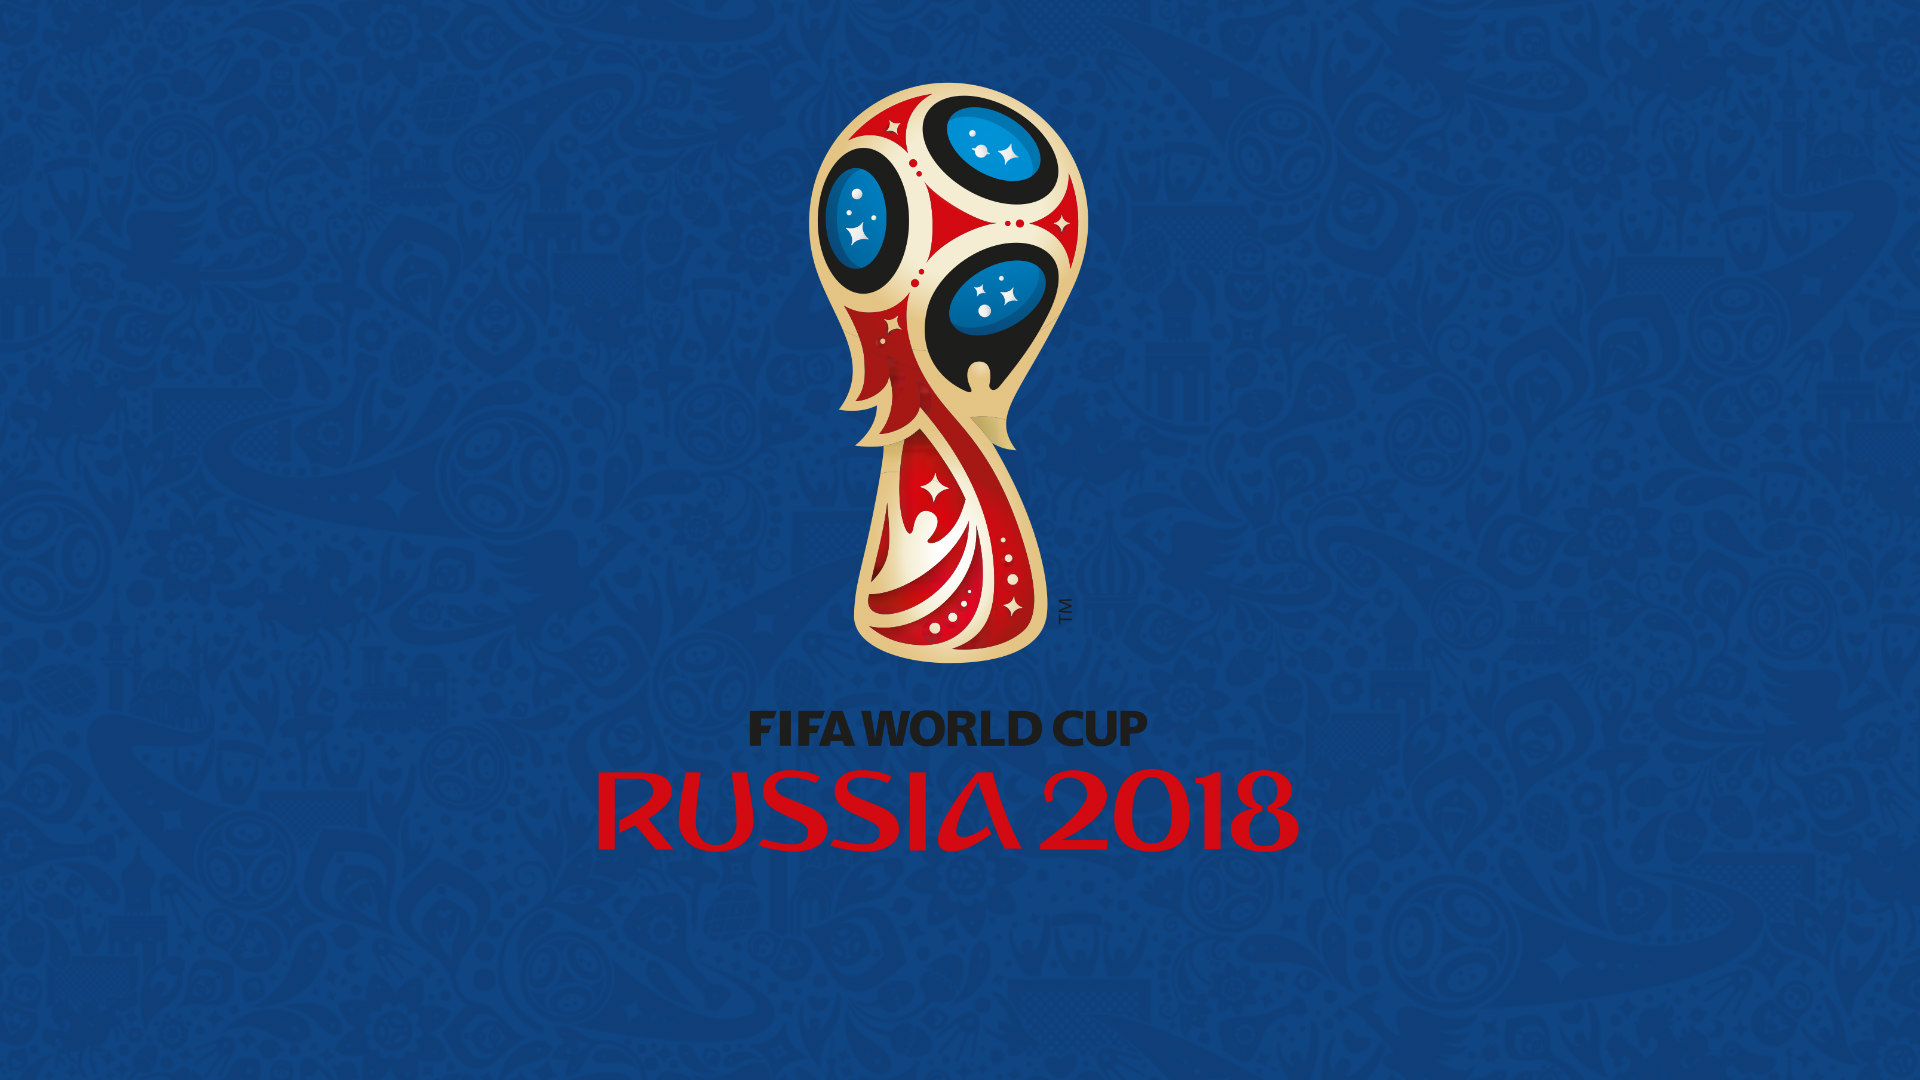 Watch World Cup 2018 Matches for Free in Oculus Venues Starting This Weekend